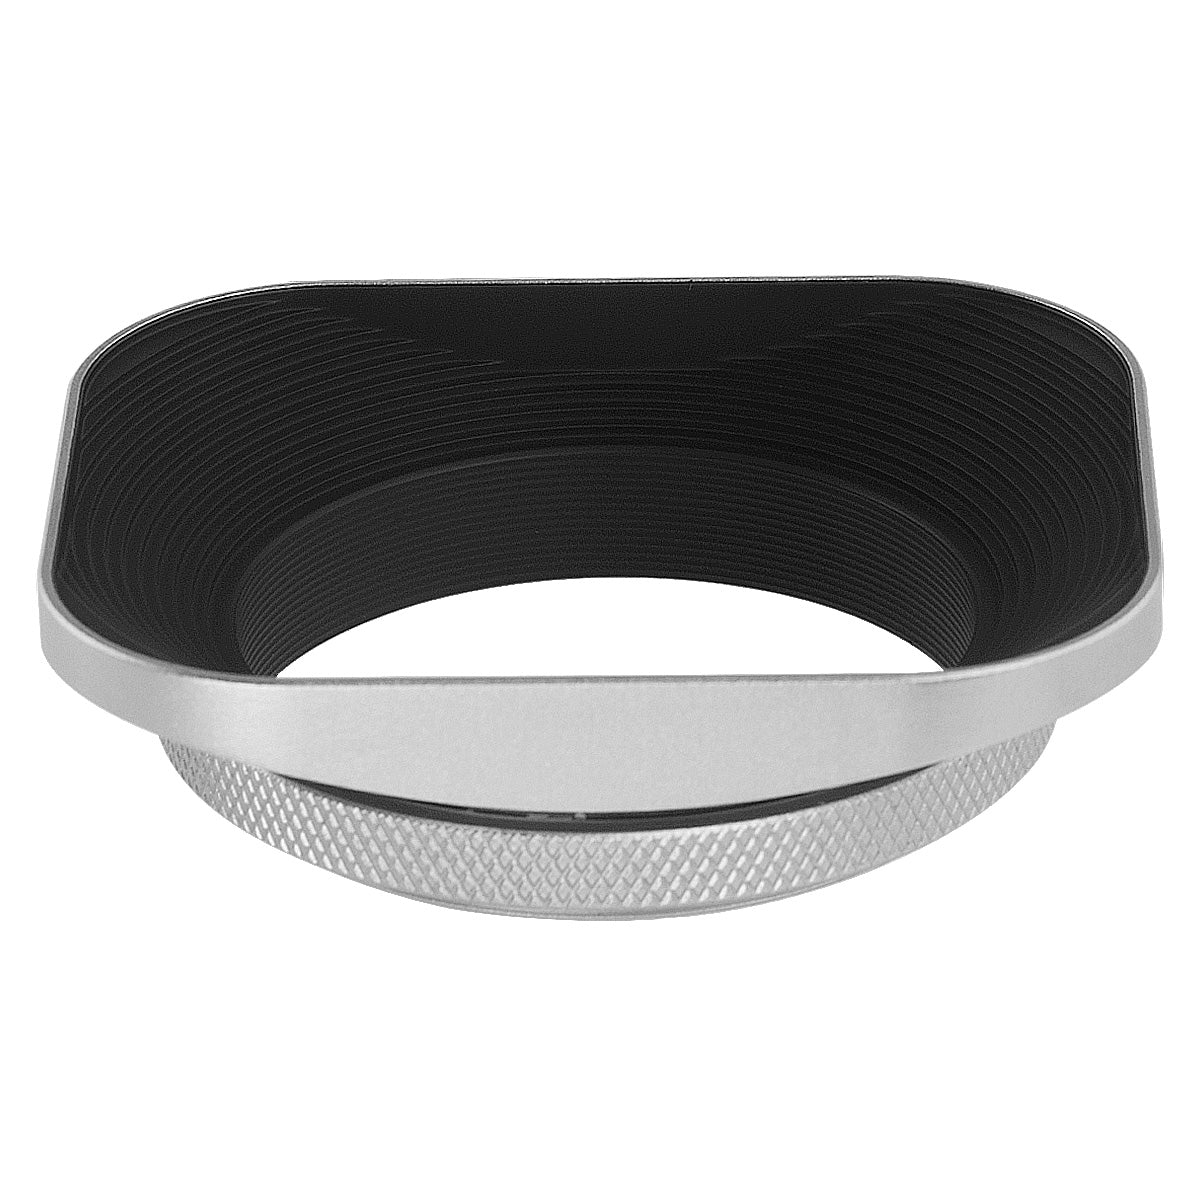 Haoge LH-EW2 49mm Square Metal Screw-in Lens Hood with Cap for 49mm Canon Nikon Sony Leica Voigtlander Nikkor Panasonic Pentax Contax Olympus Lens and Other Lens with 49mm Filter Thread Silver